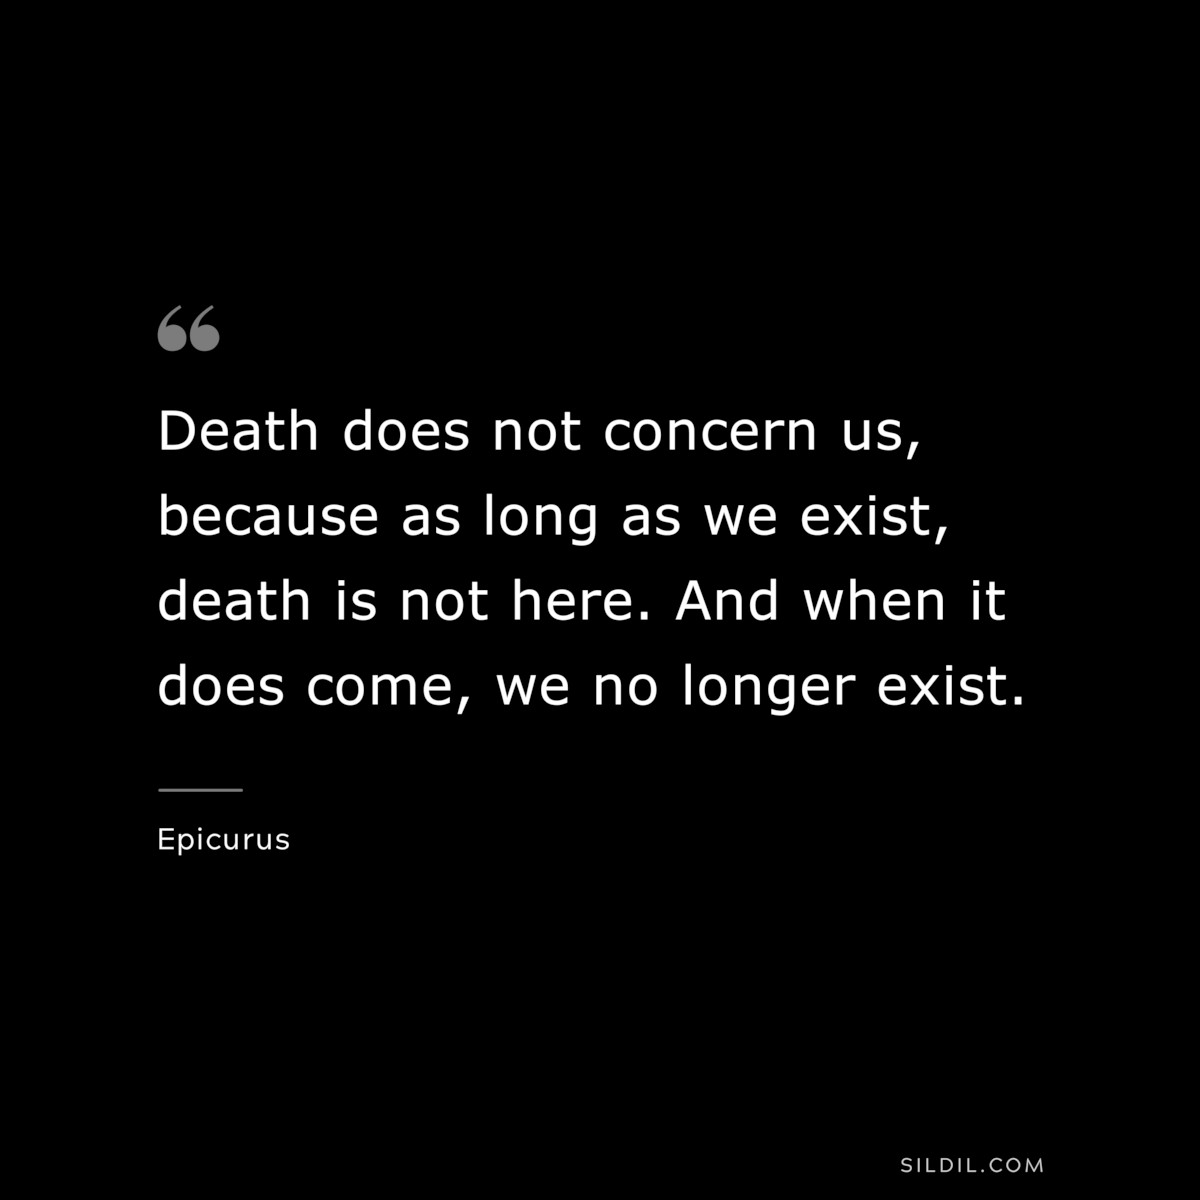 Death does not concern us, because as long as we exist, death is not here. And when it does come, we no longer exist. — Epicurus